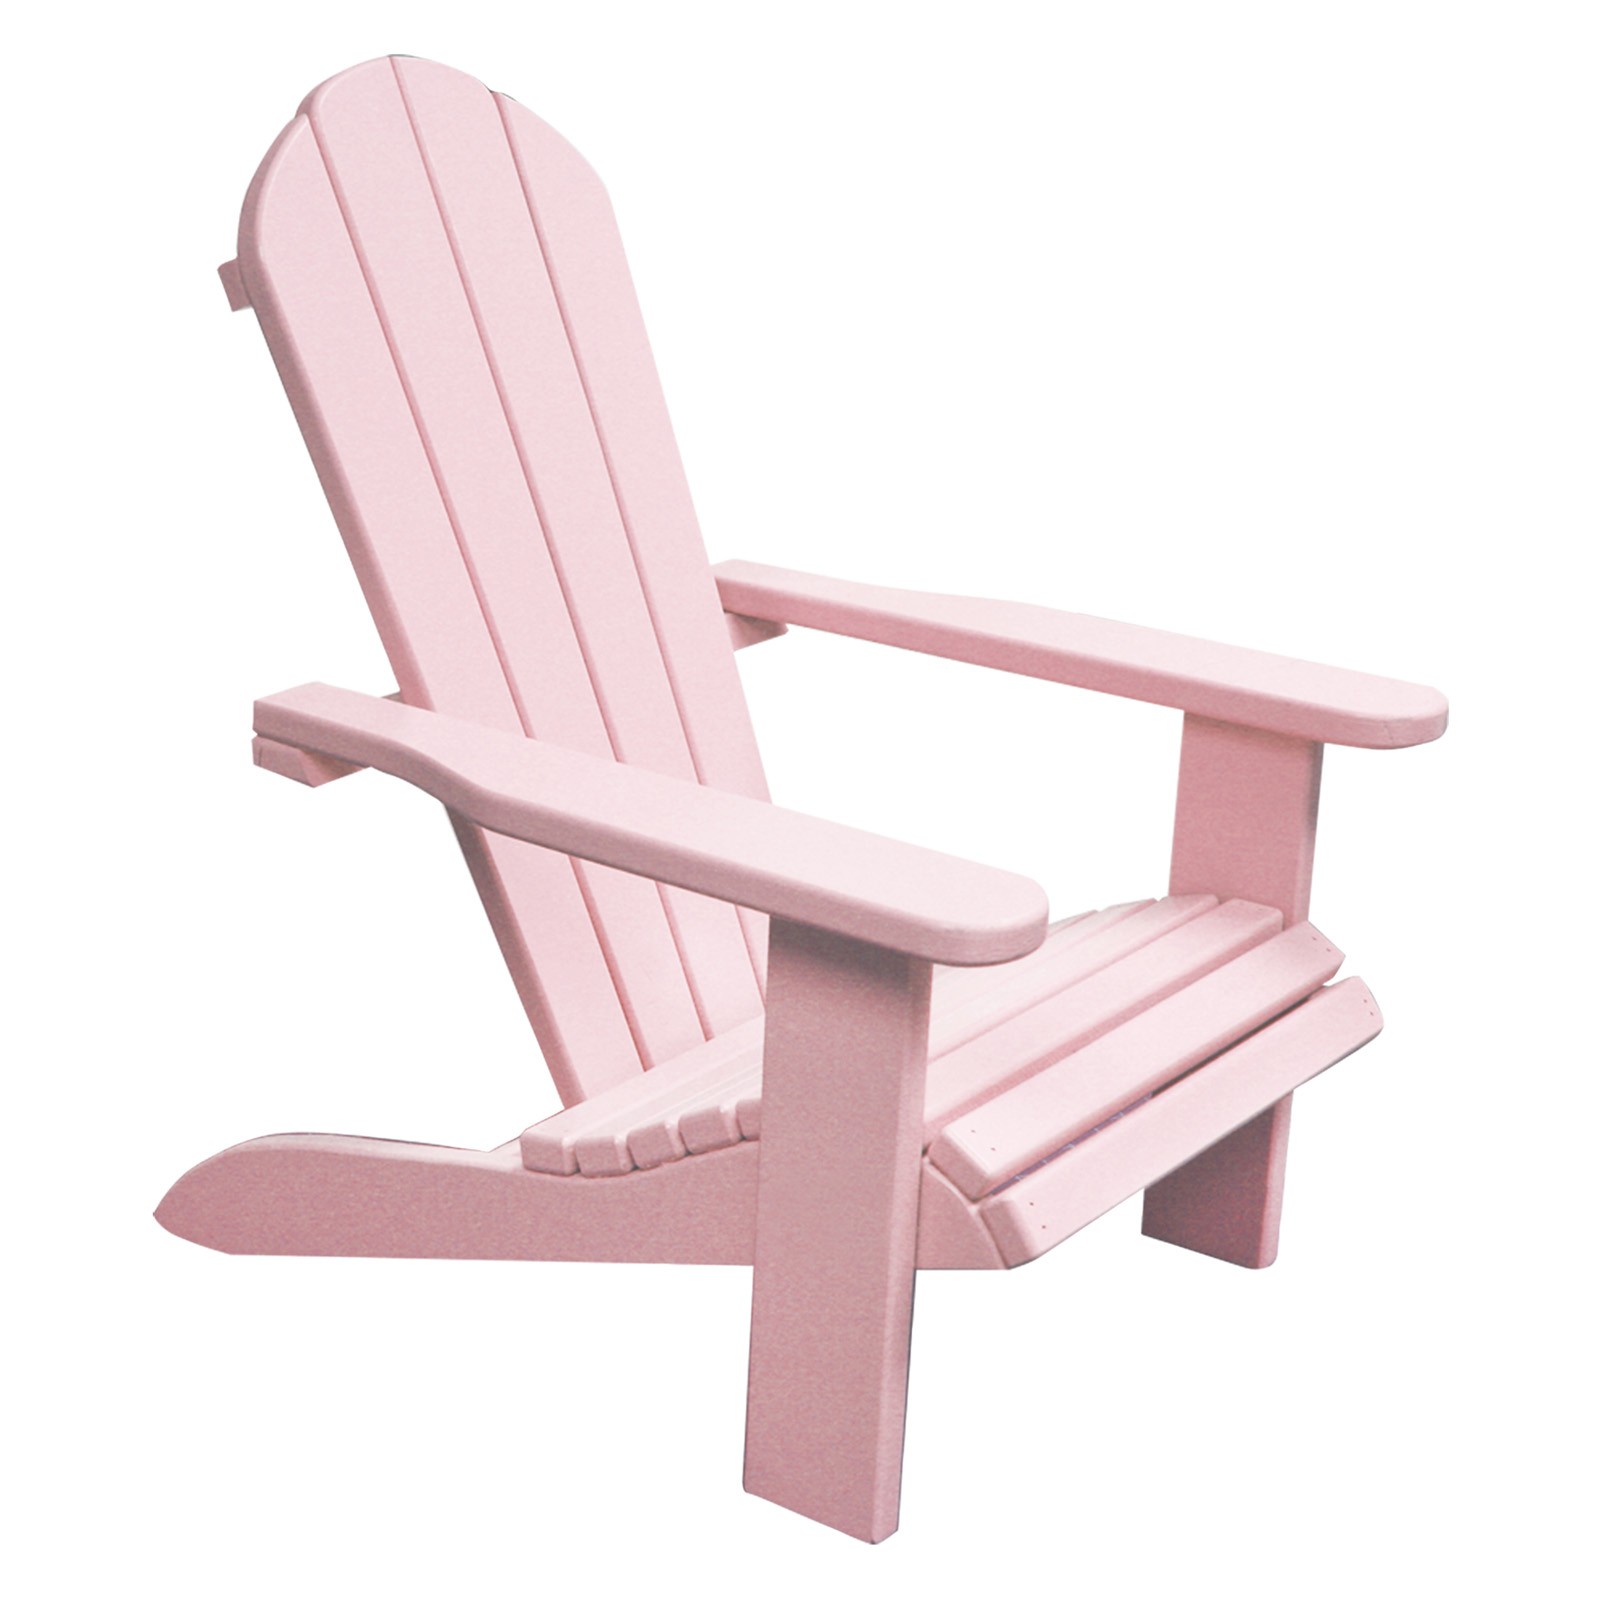 Newco kids wooden outdoor chair pink do not use at